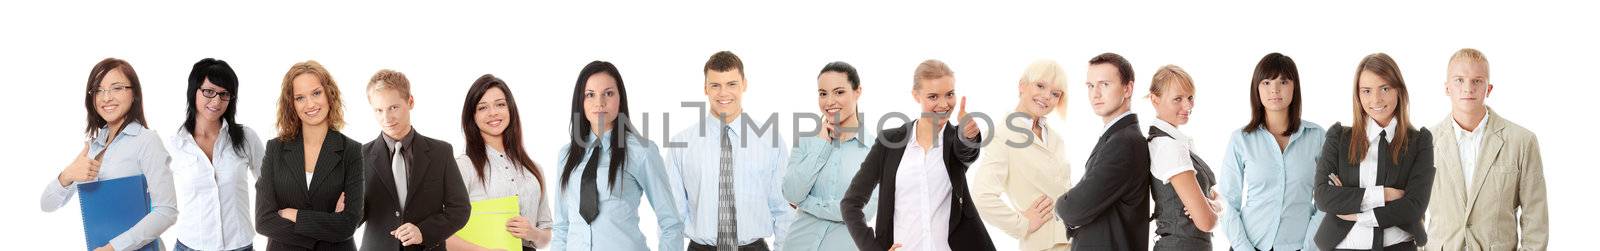 Group of successful business people isolated on white.